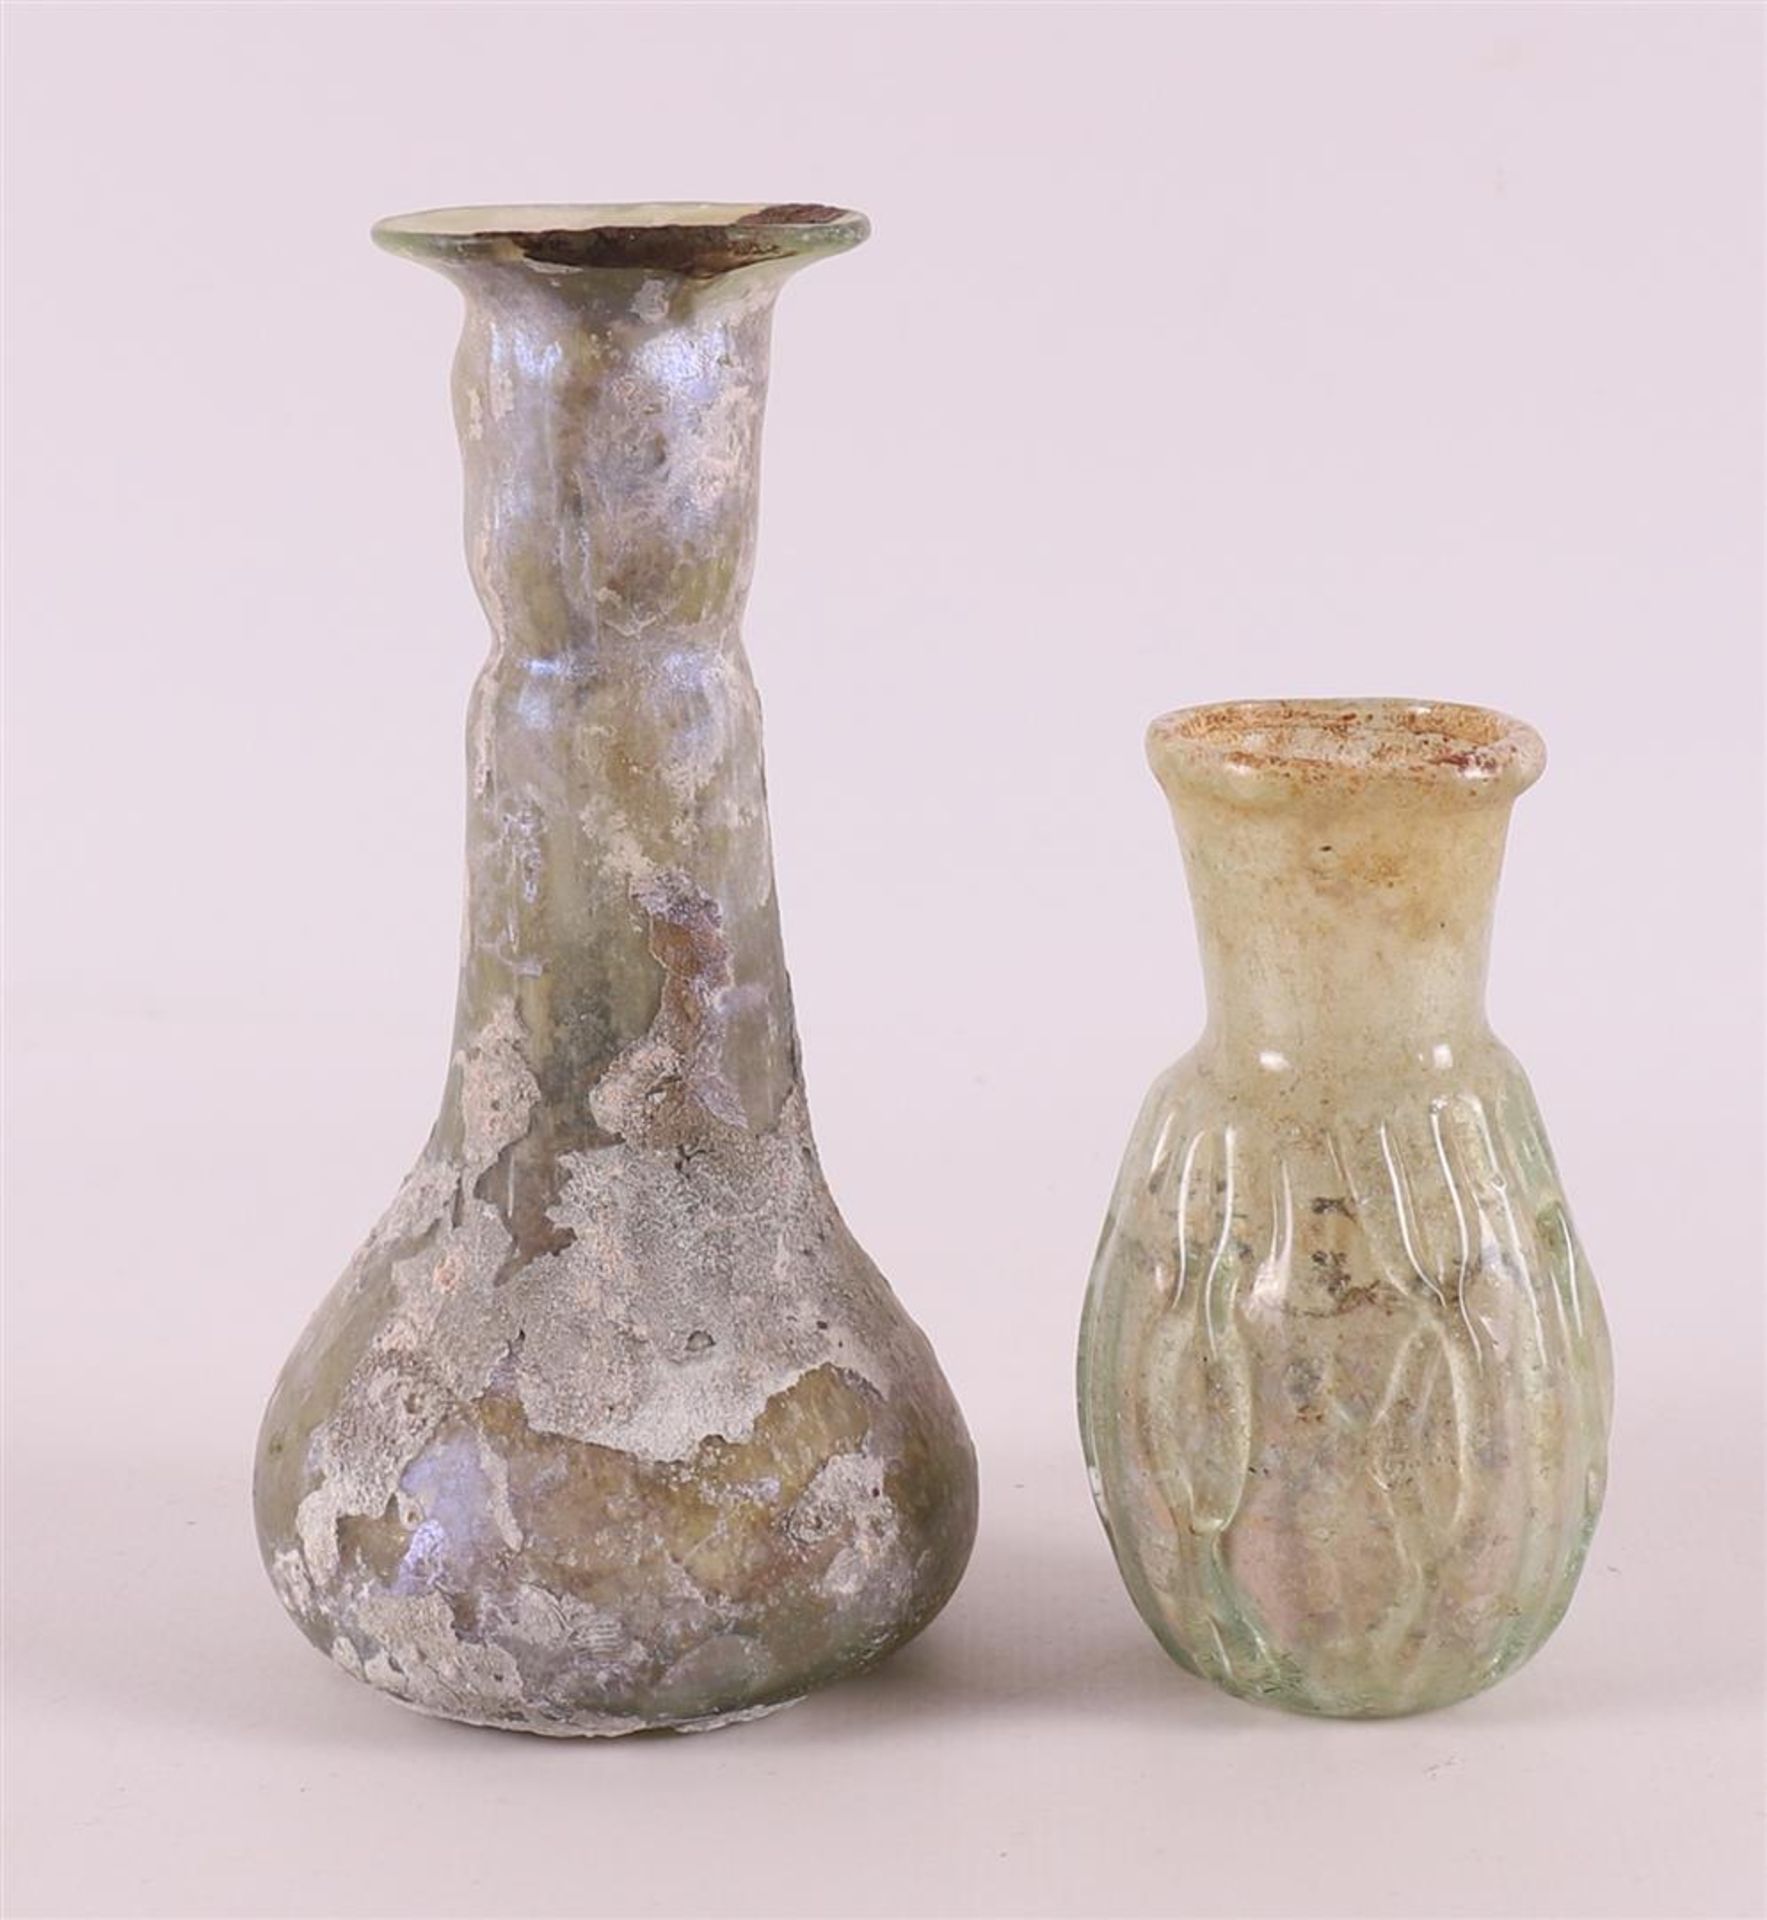 Two various Roman glass vases, 2nd - 4th century. - Image 3 of 6